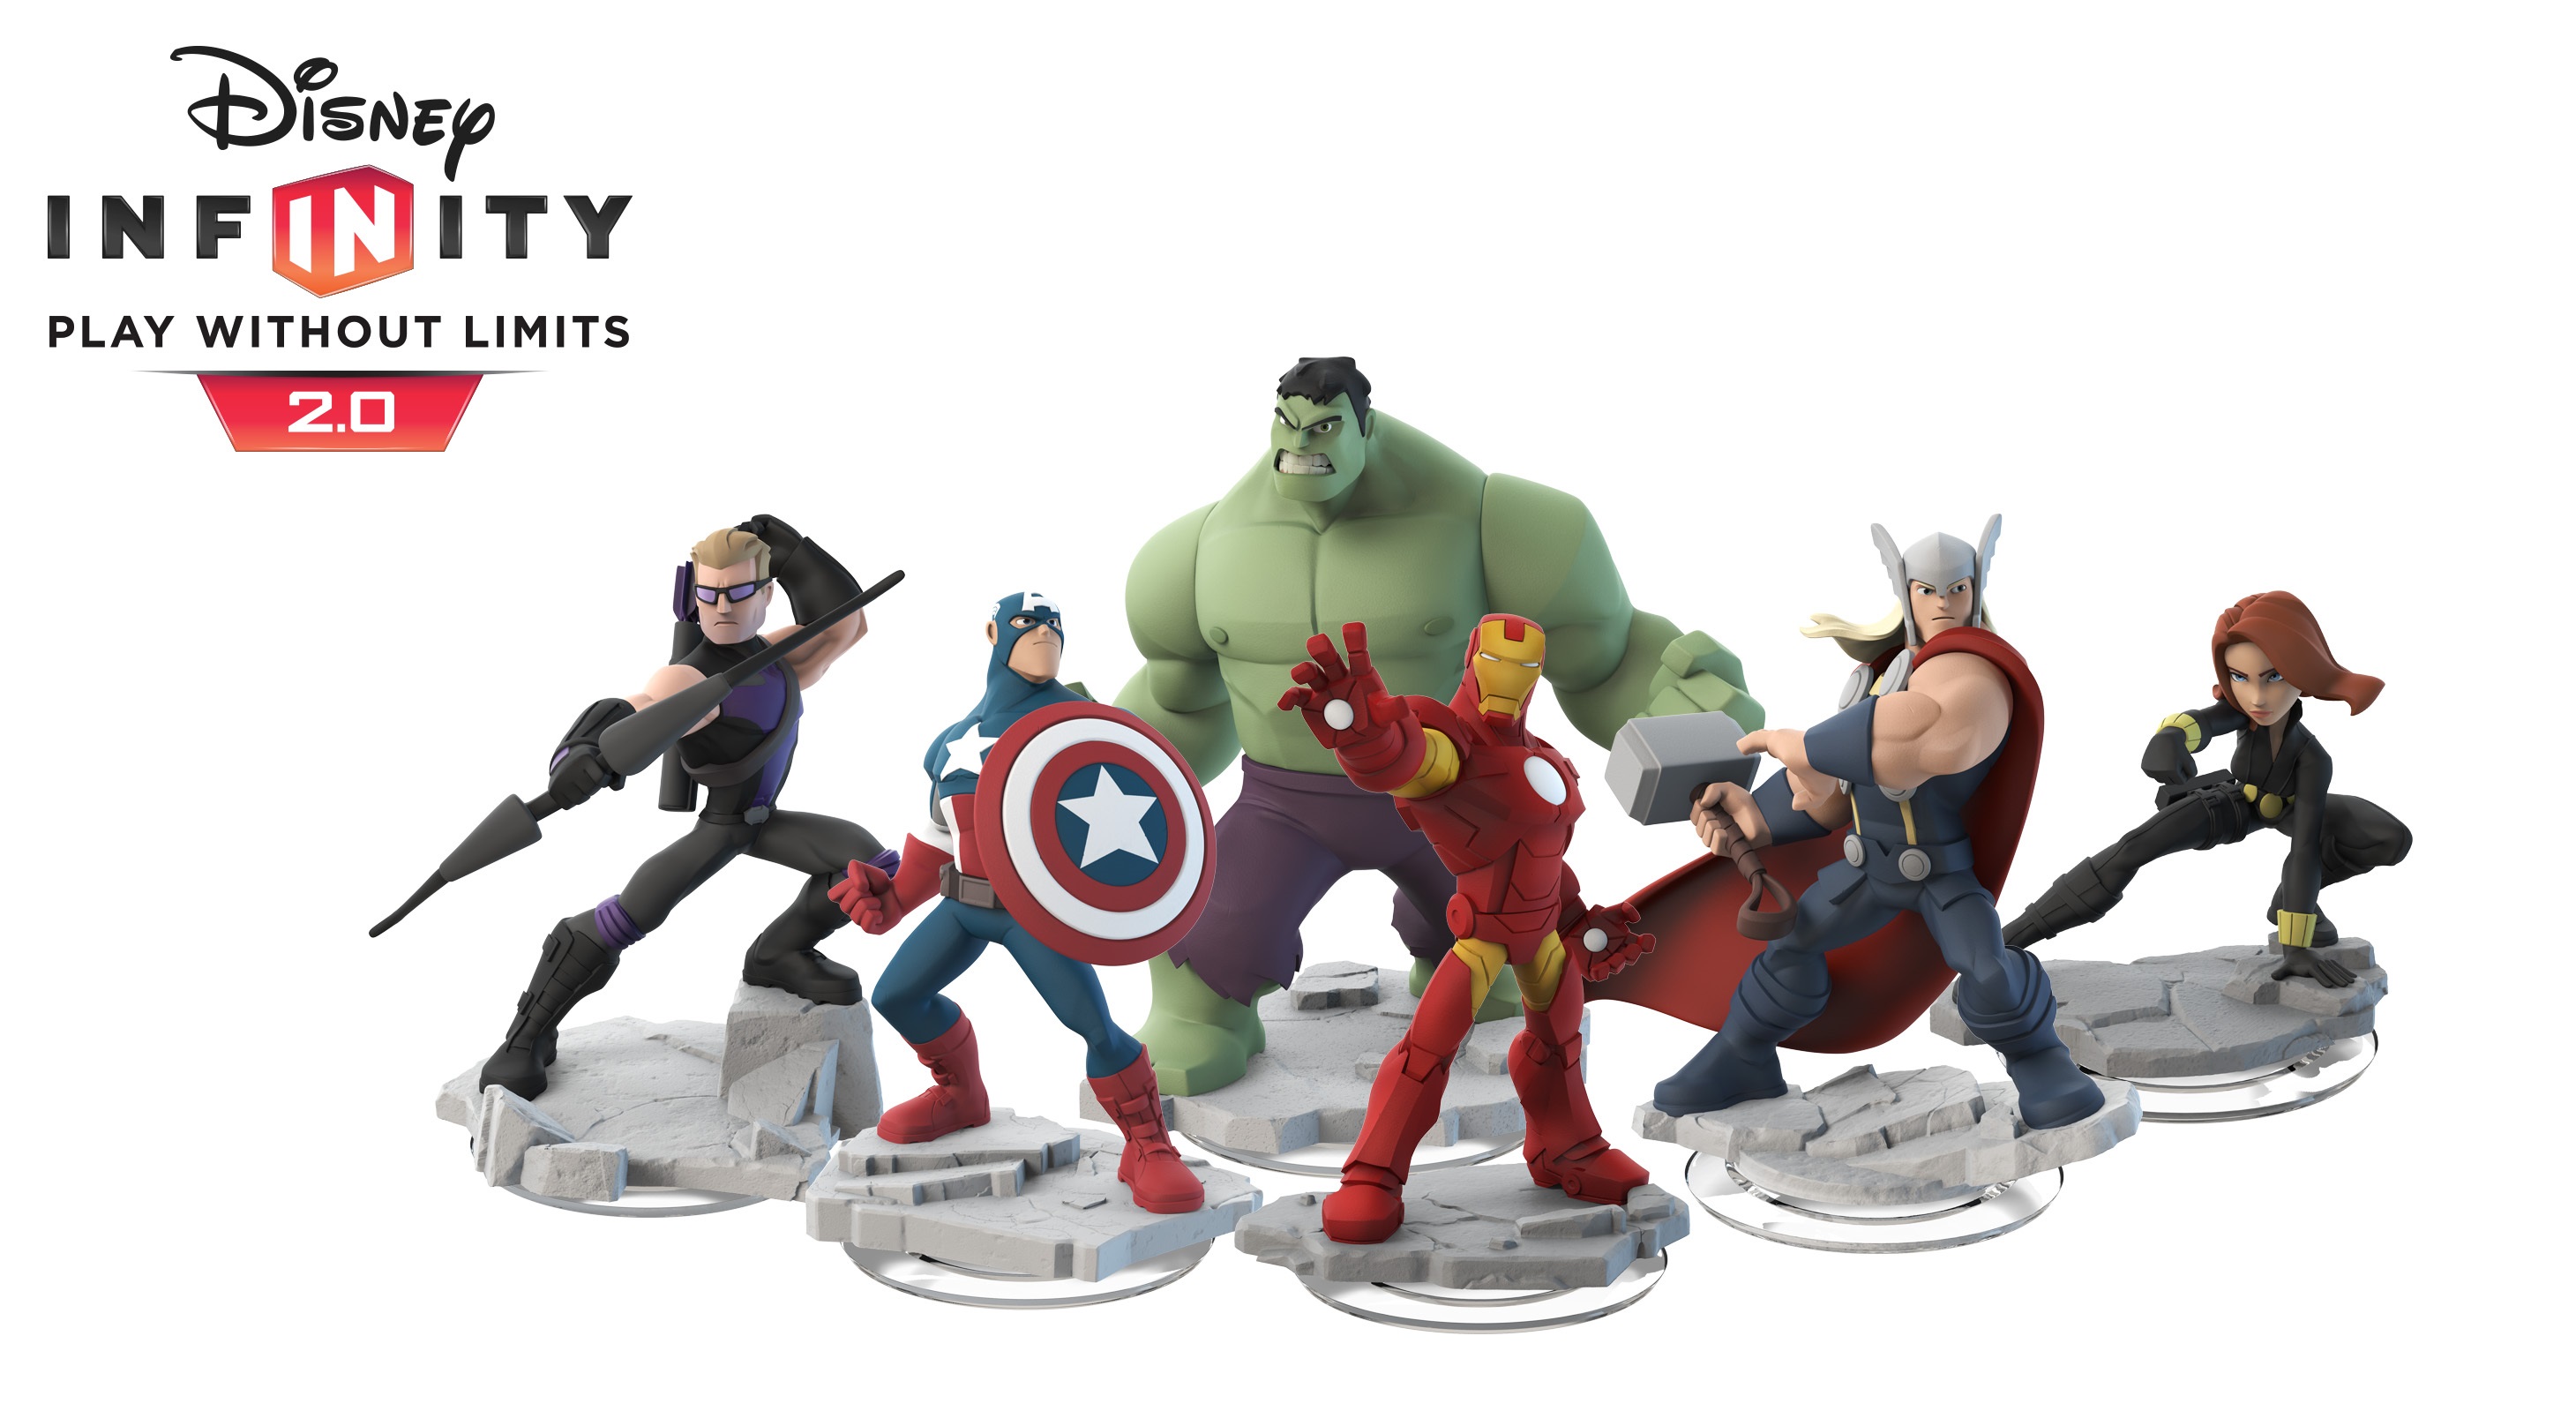 Geek insider, geekinsider, geekinsider. Com,, 'disney infinity: marvel' will get kids into comic books, gaming